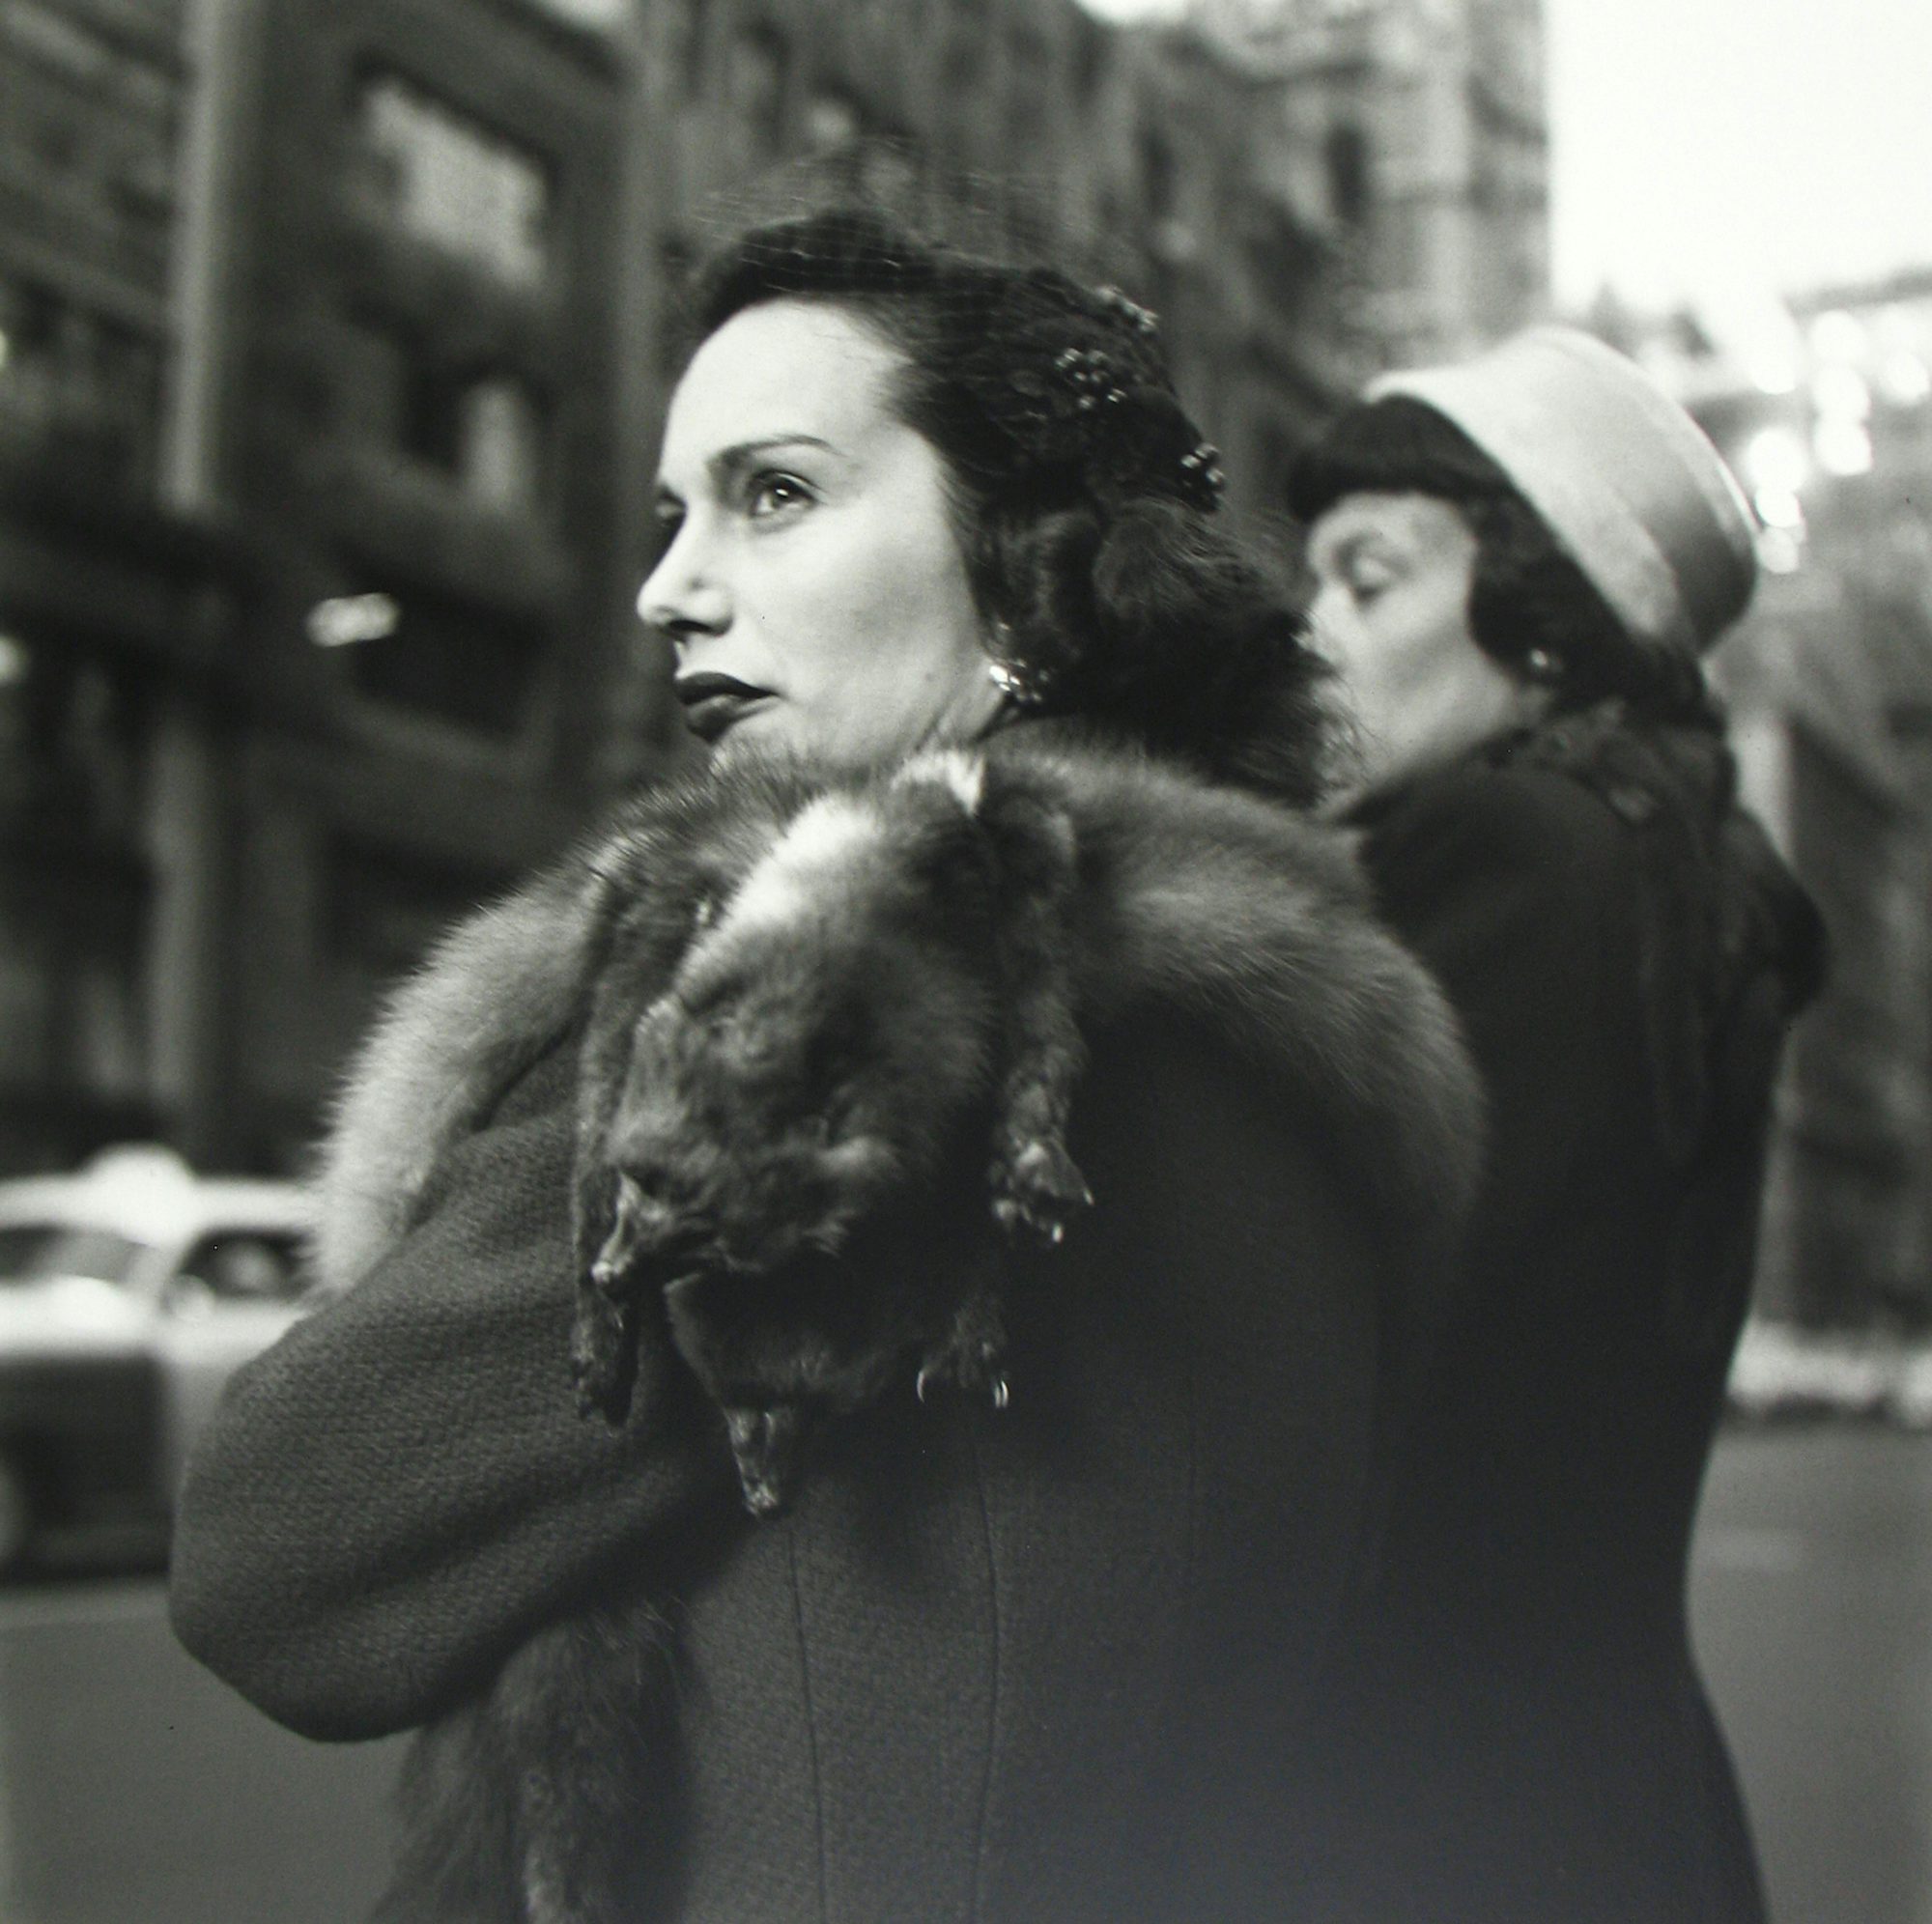 Vivian Maier, New York, December 2, 1954 Copyright Estate of Vivian Maier, Courtesy of Maloof Collection and Howard Greenberg Gallery, NY